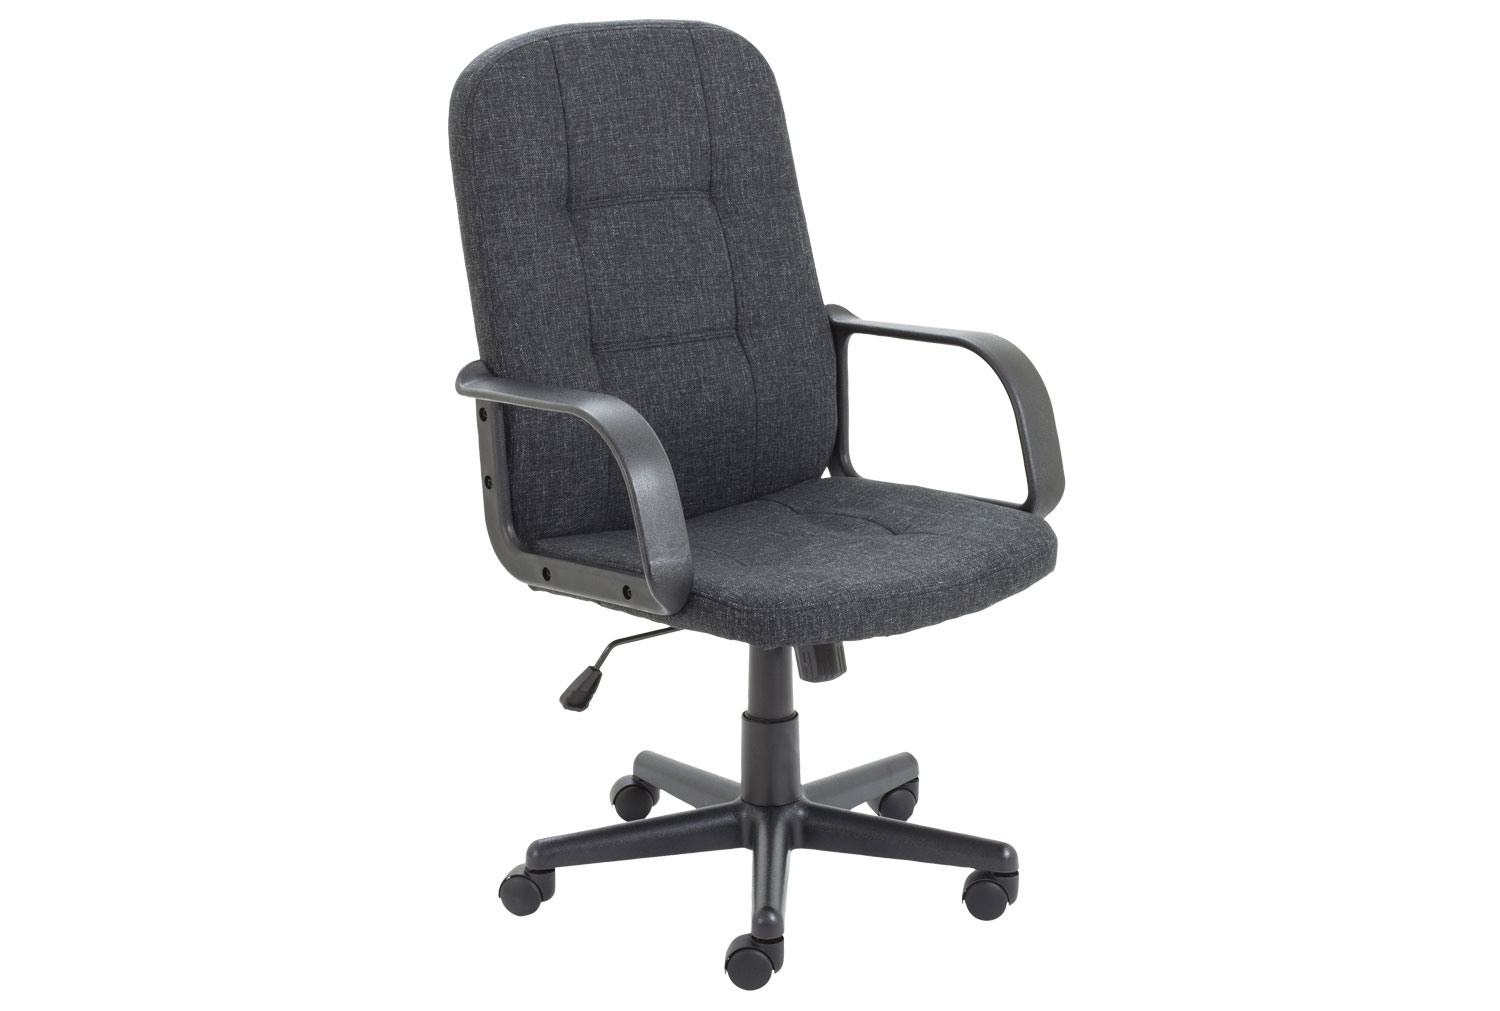 Cerami Fabric Executive Office Chair, Charcoal, Express Delivery